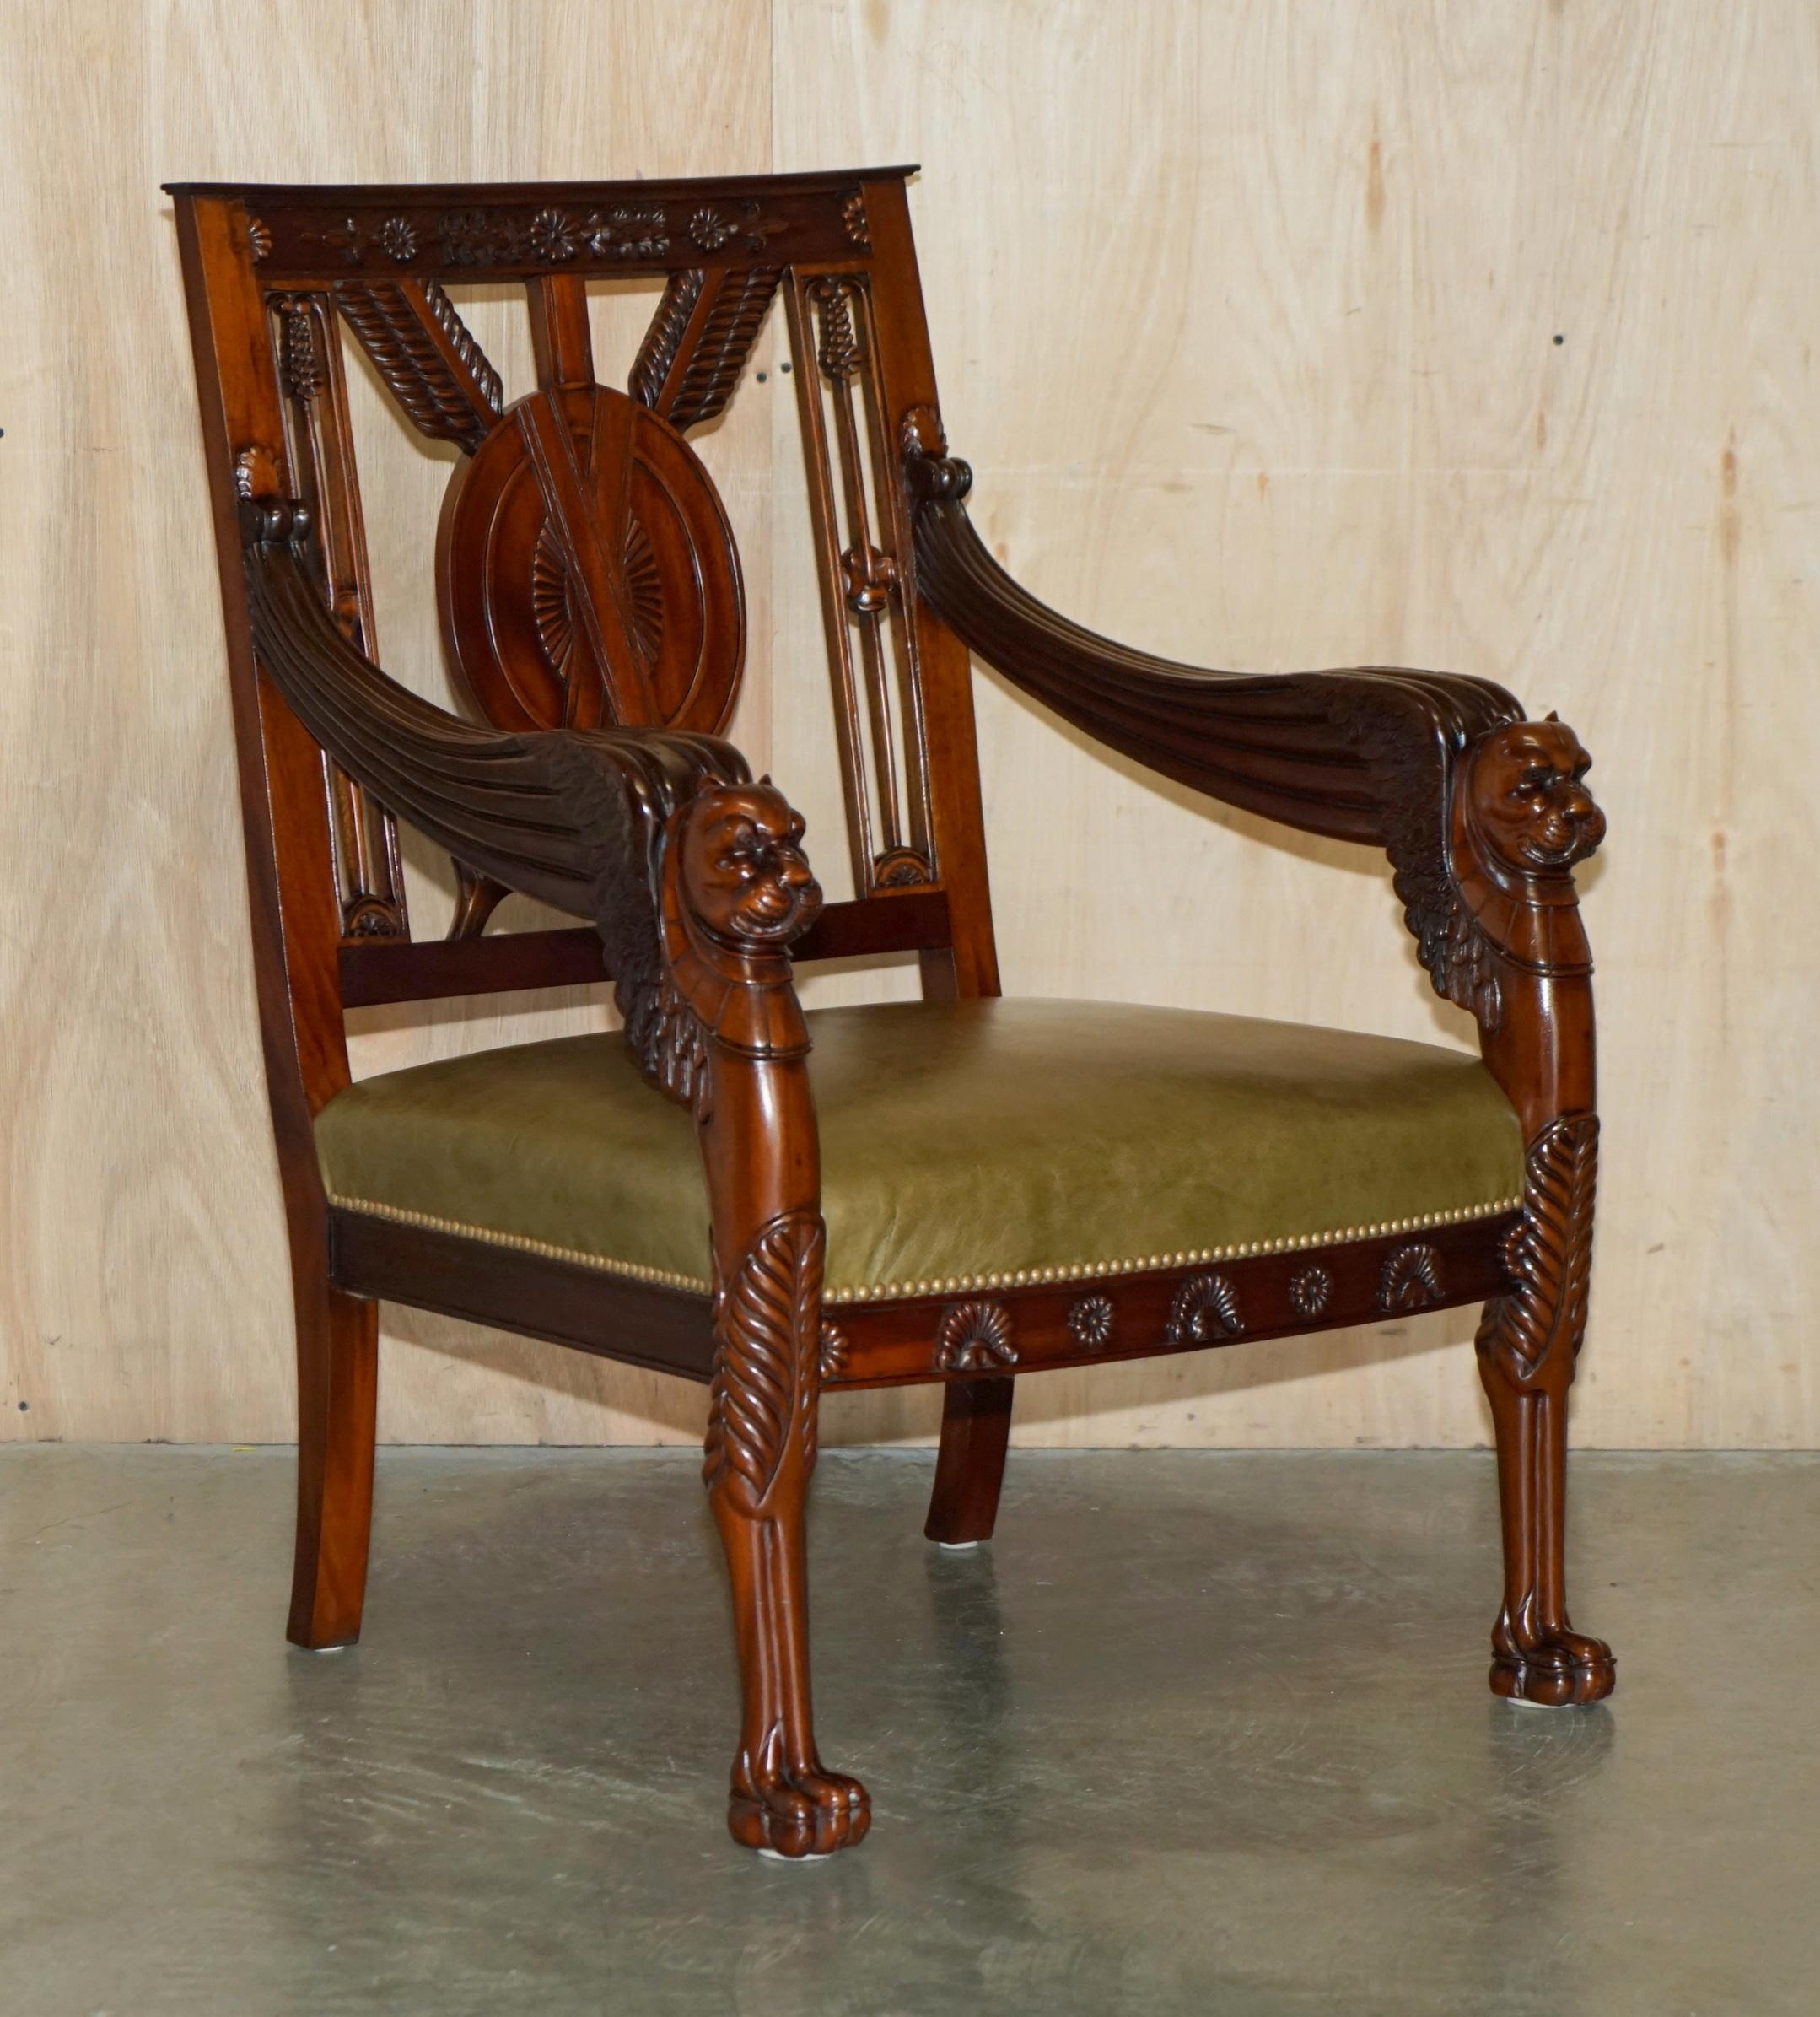 Royal House Antiques

Royal House Antiques is delighted to offer for sale this super decorative pair of large hand carved Mahogany and leather library armchairs with ornately carved lion griffon winged pillared arms and arrow and shield back

Please